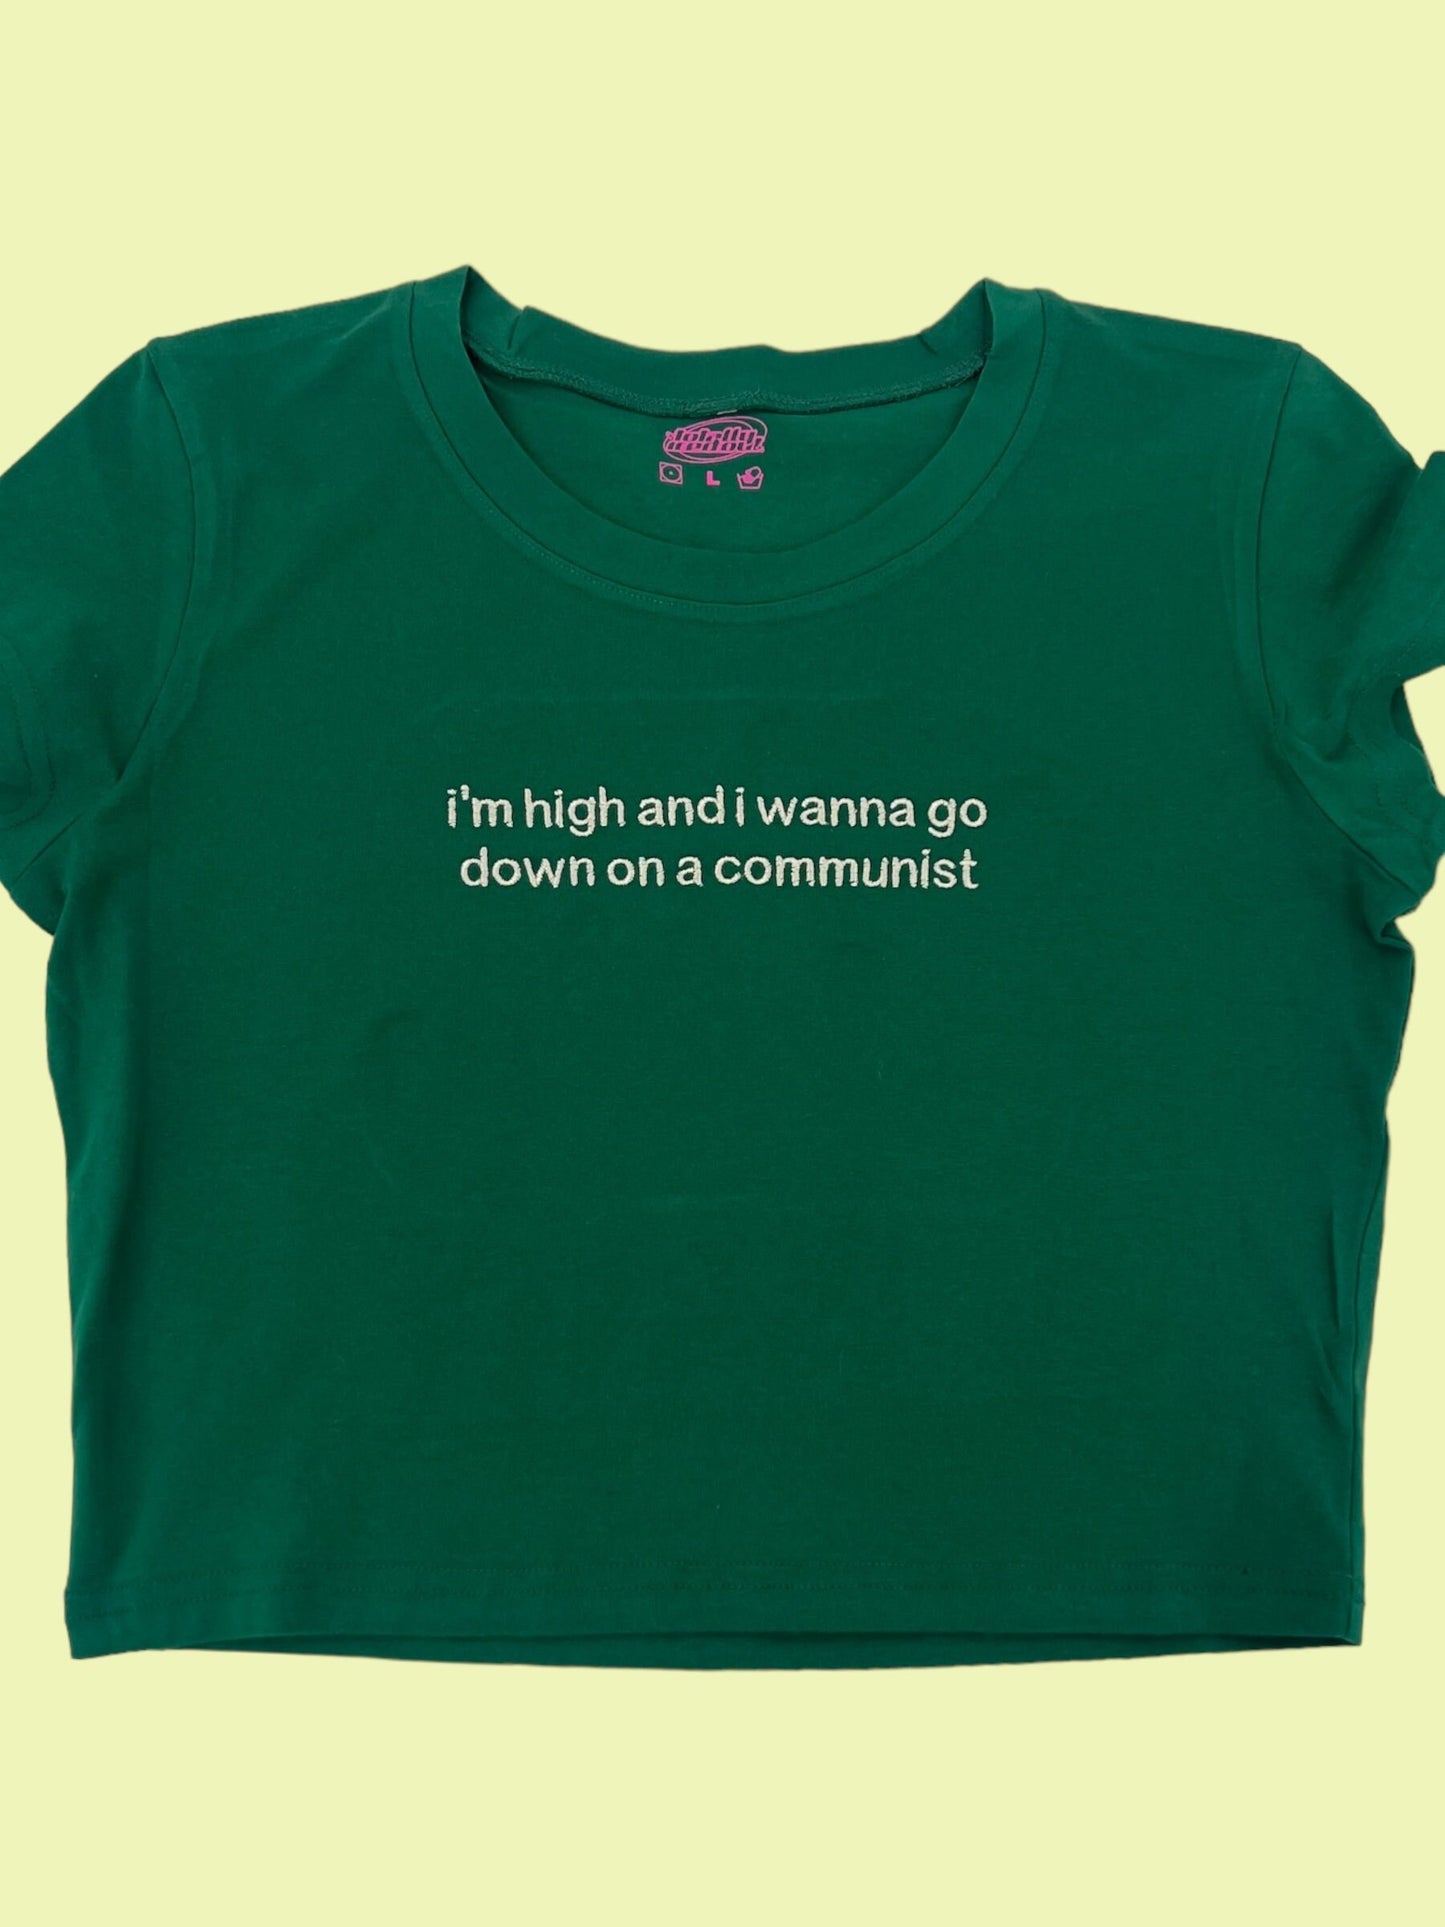 a green t - shirt with a quote on it